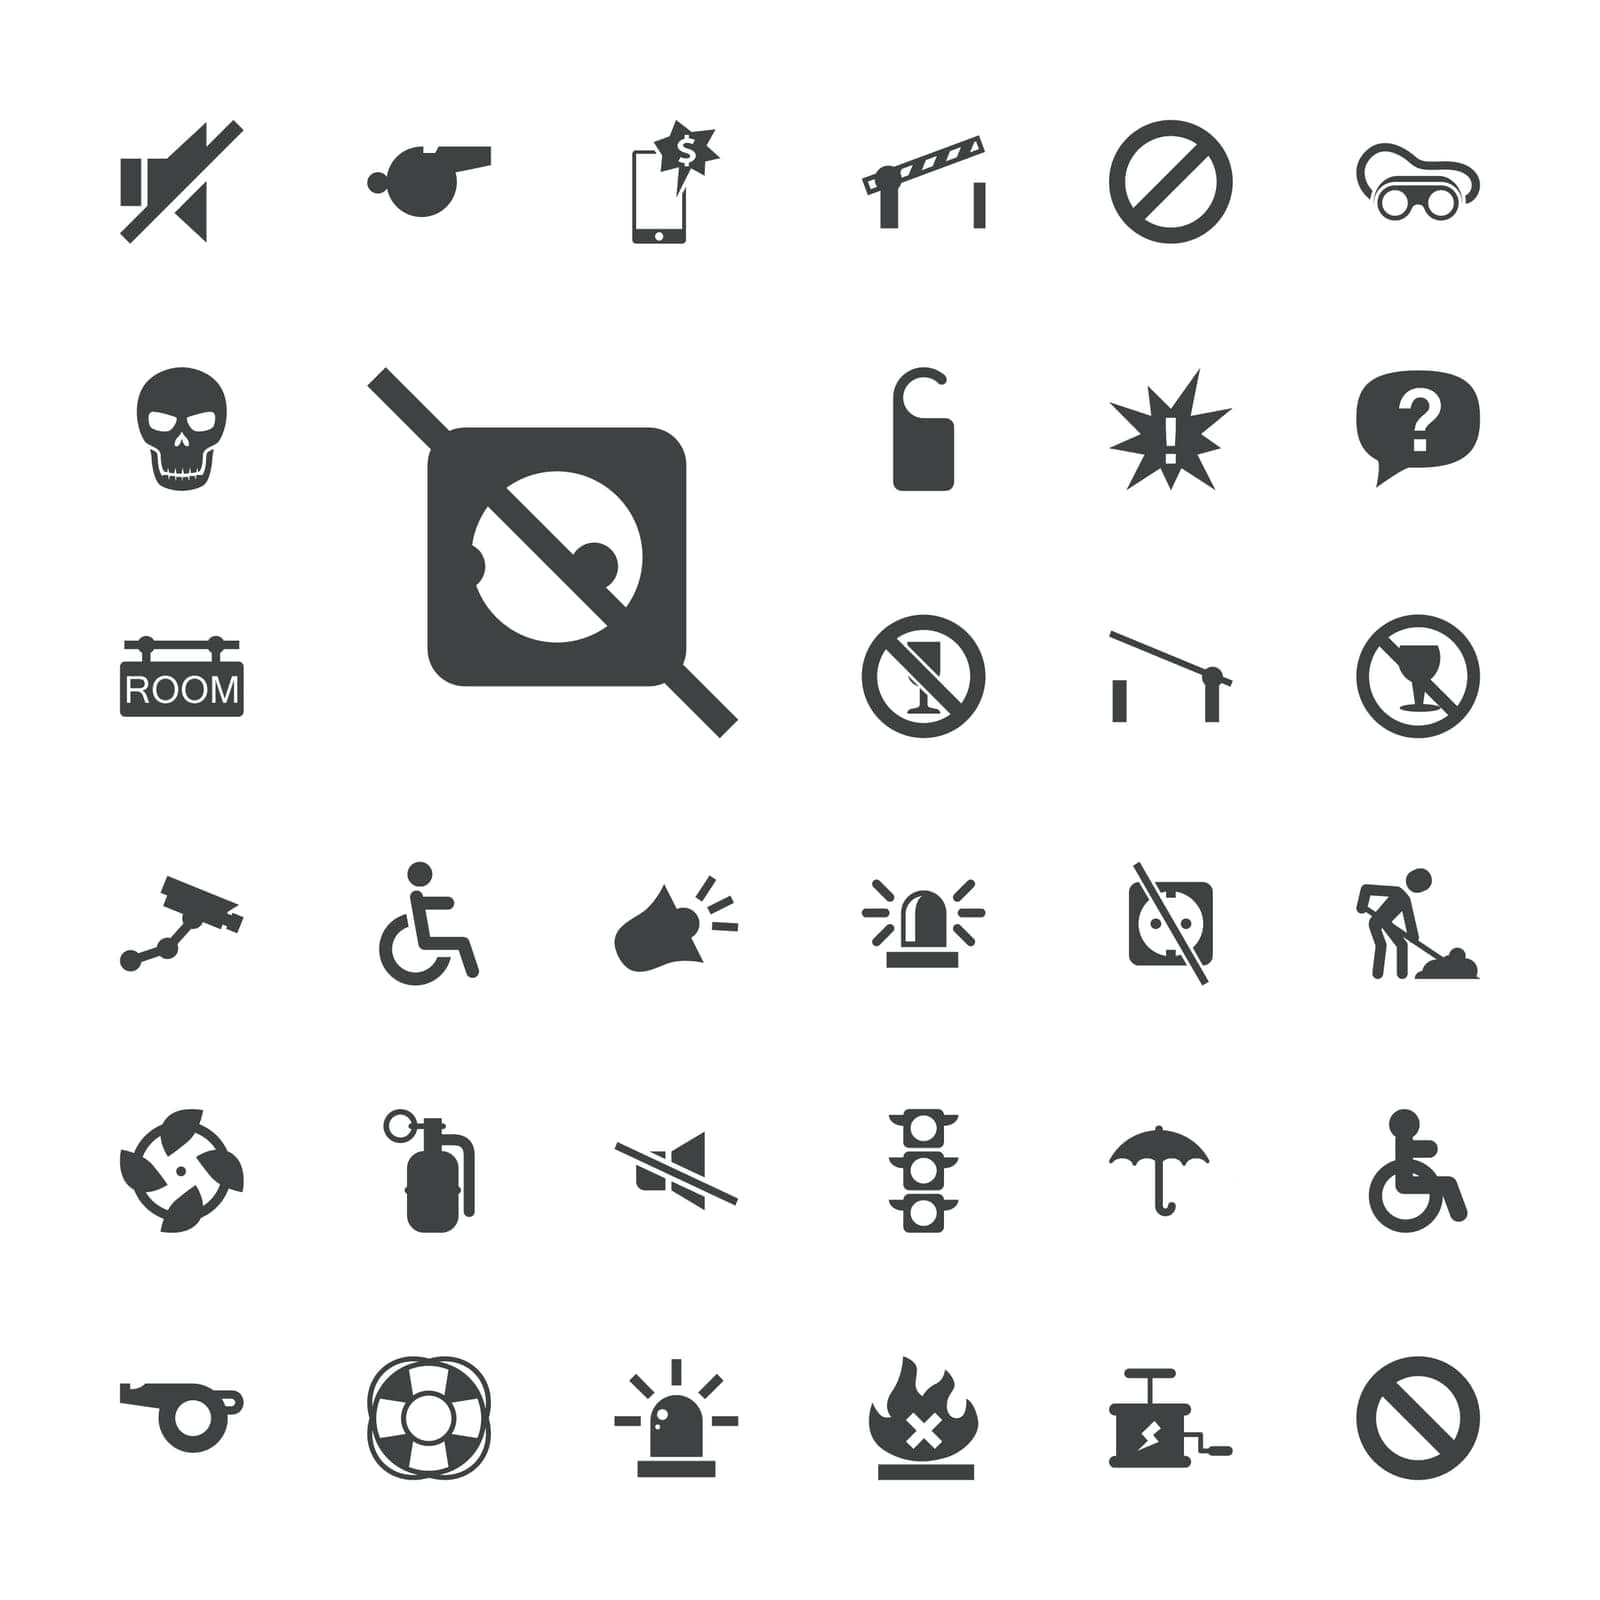 symbol,no,siren,sound,icon,exclamation,do,glasses,security,fan,not,dynamite,barrier,road,disturb,fire,warning,disabled,vector,man,tag,skull,cargo,camera,traffic,alcohol,set,welding,whistle,dry,digging,message,drink,room,important,light,prohibited,keep,plug